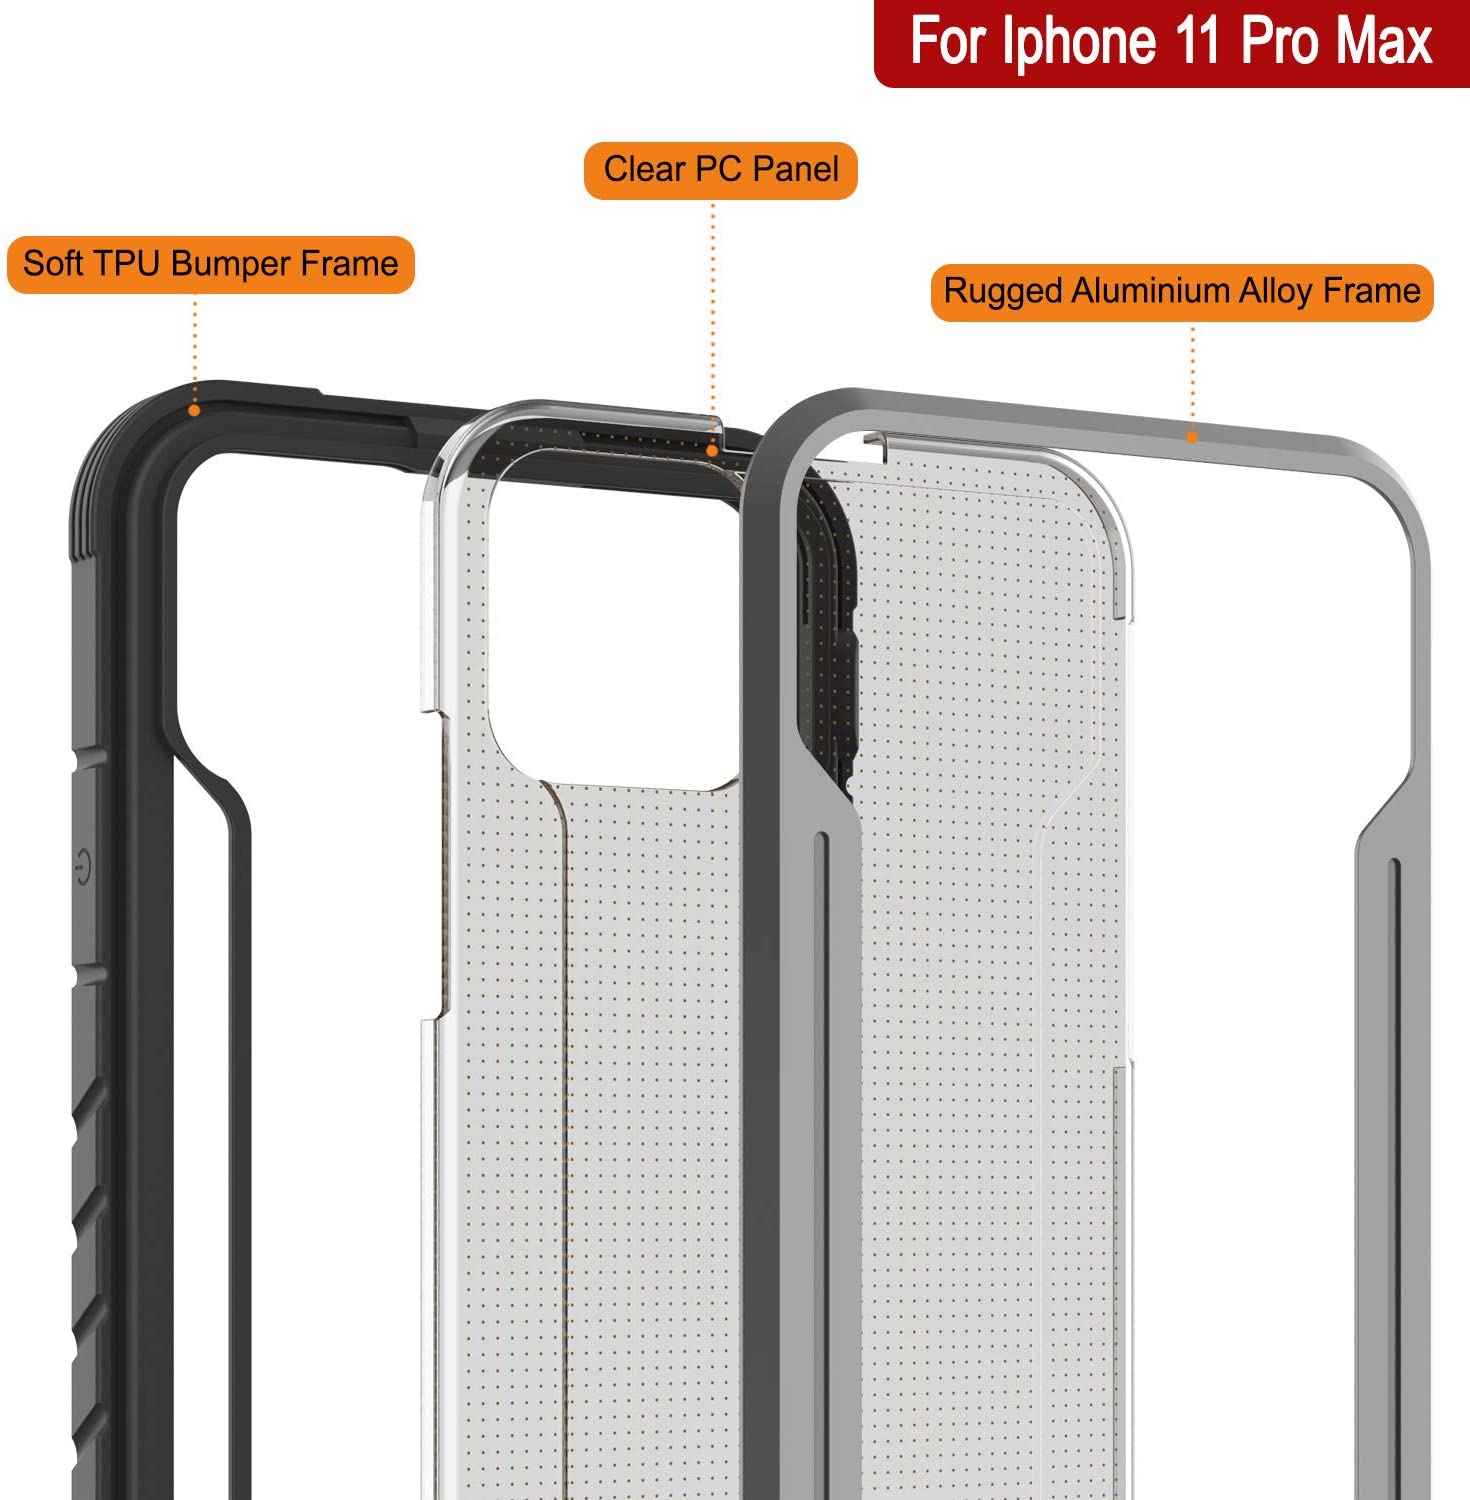 Punkcase iPhone 11 Pro Max ravenger Case Protective Military Grade Multilayer Cover [Grey-Black]